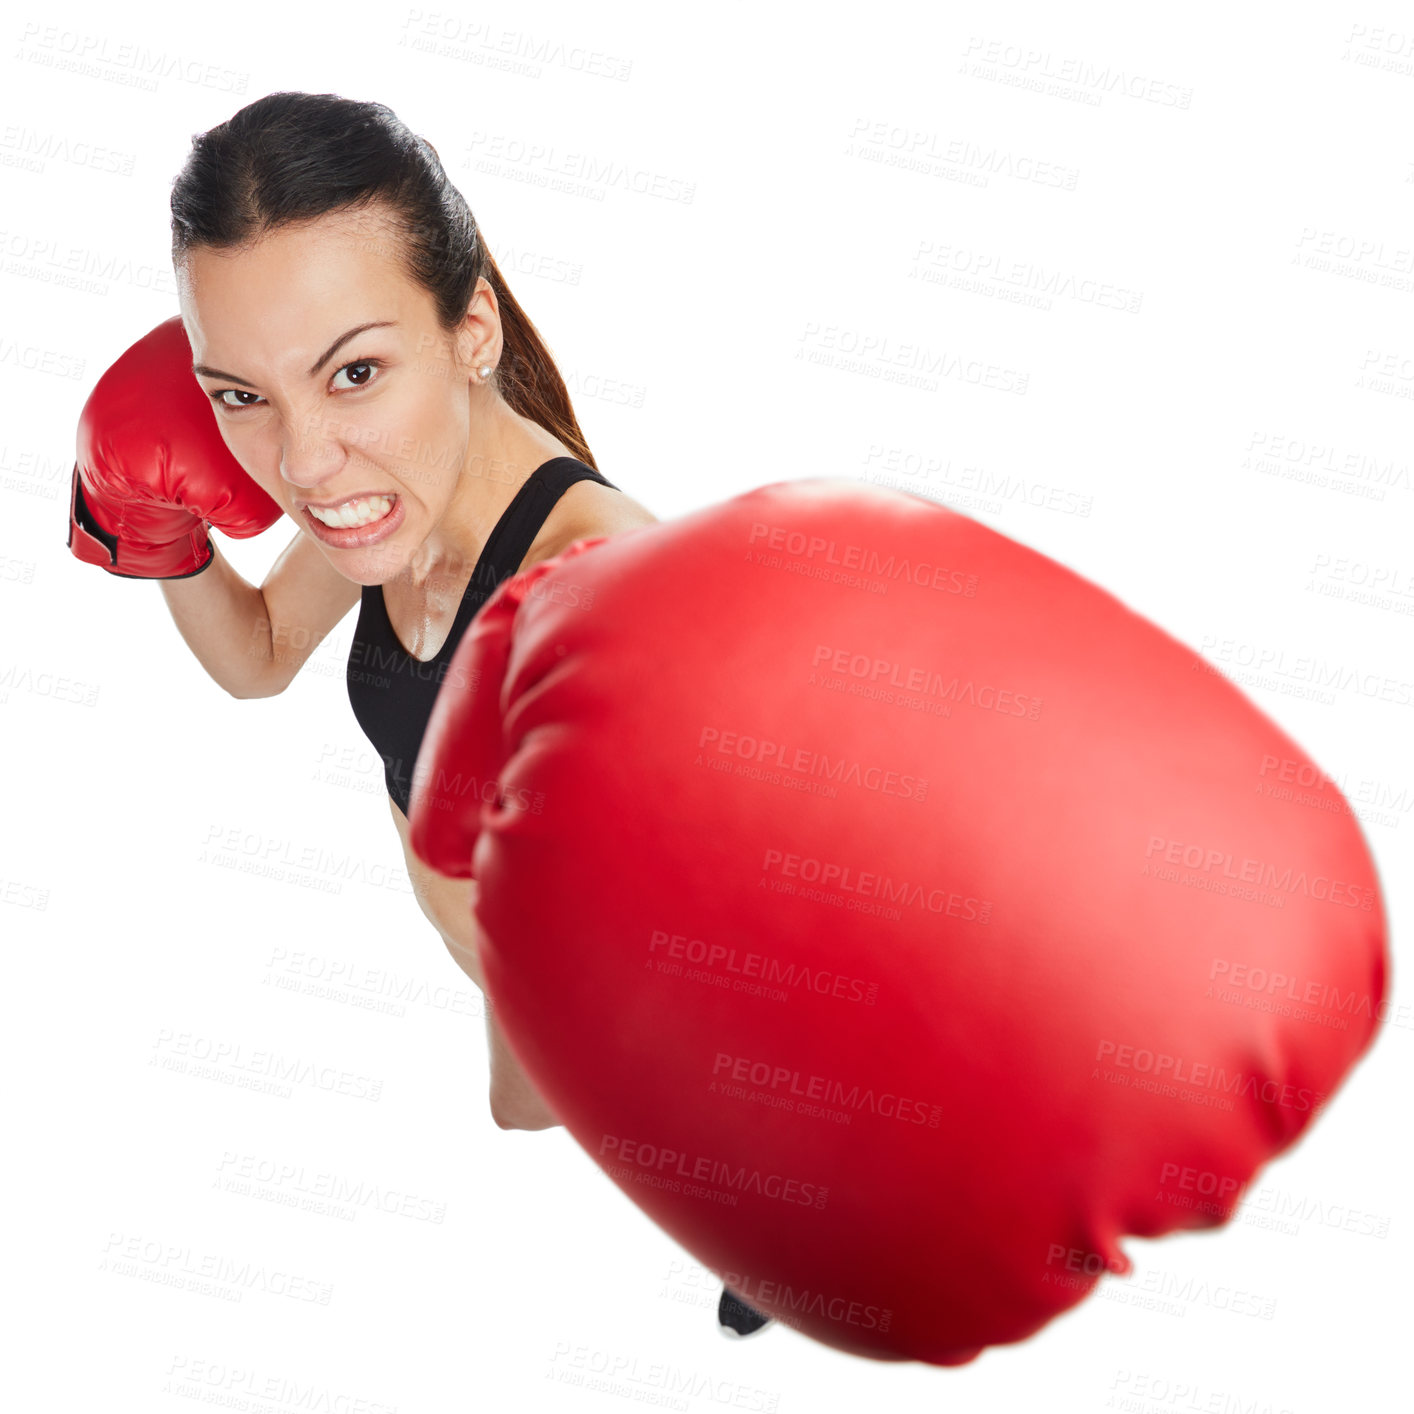 Buy stock photo High angle portrait of a young female athlete boxing against a white background